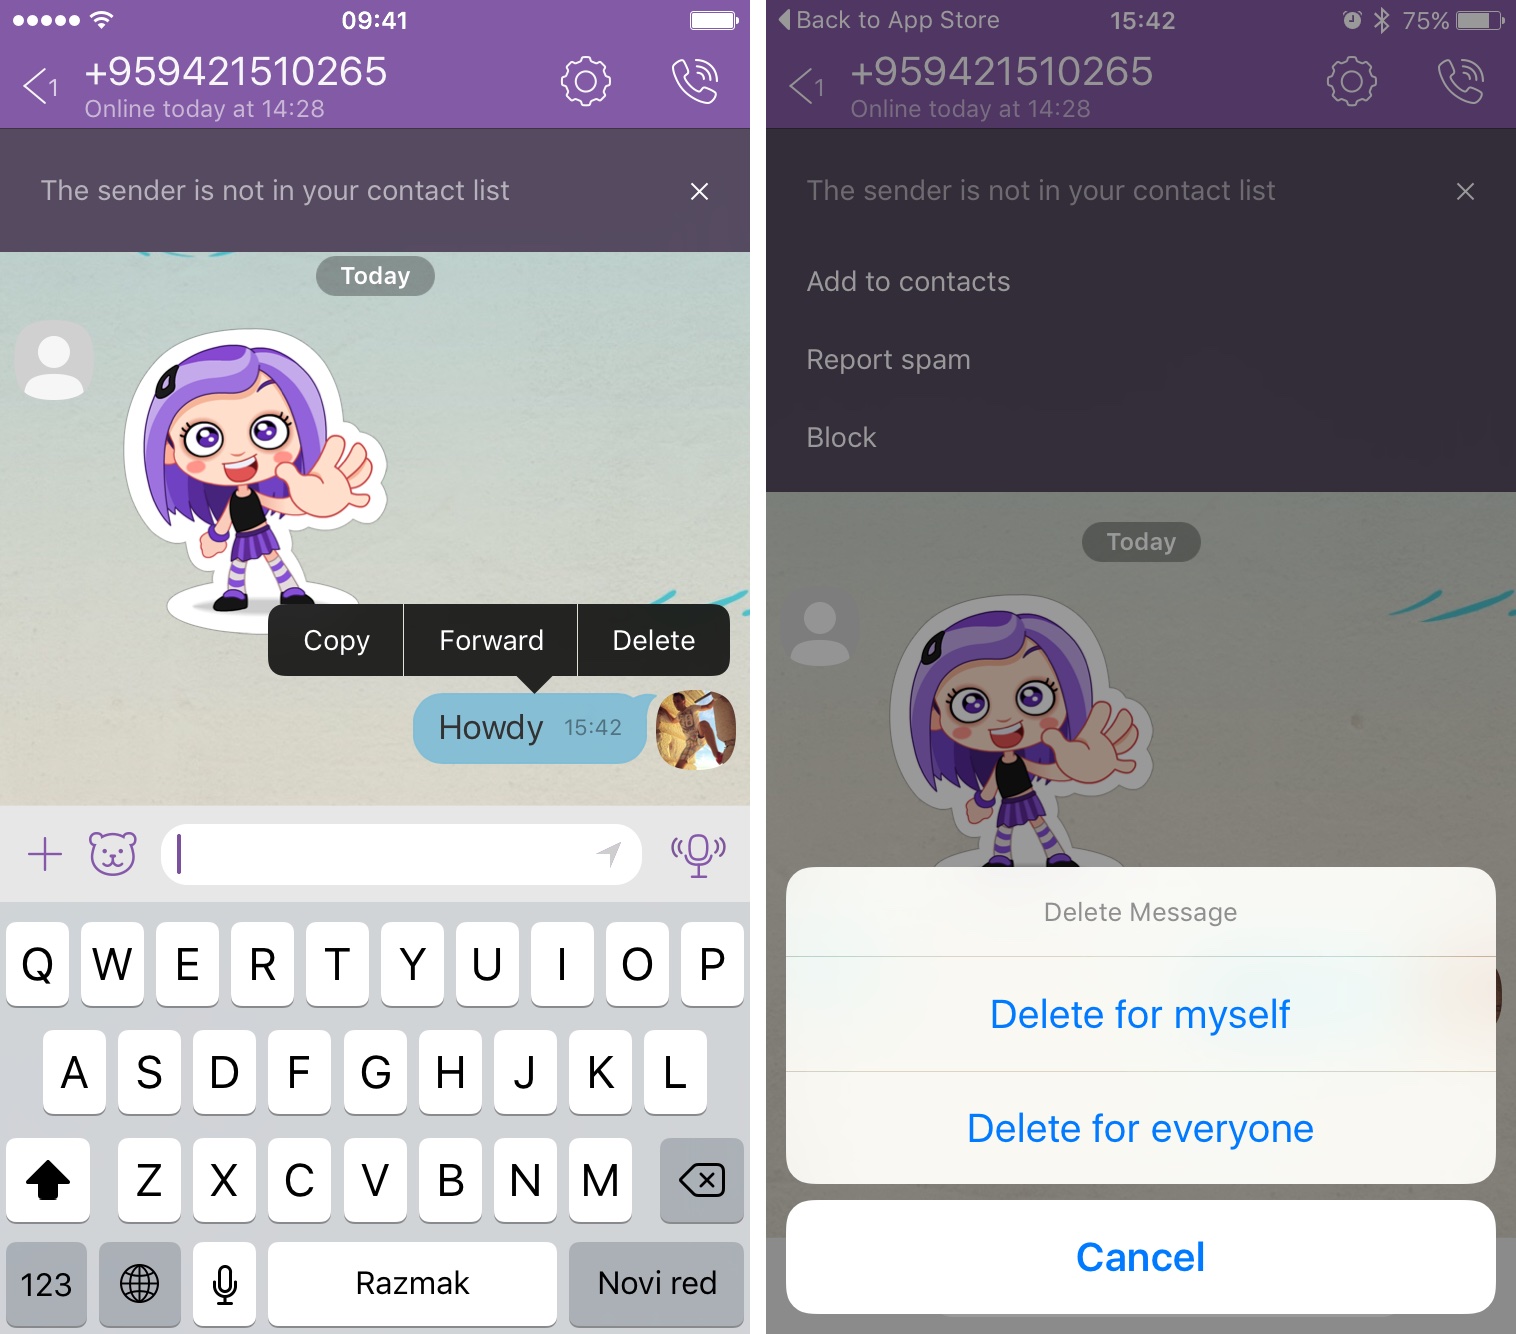 download viber for iphone without app store